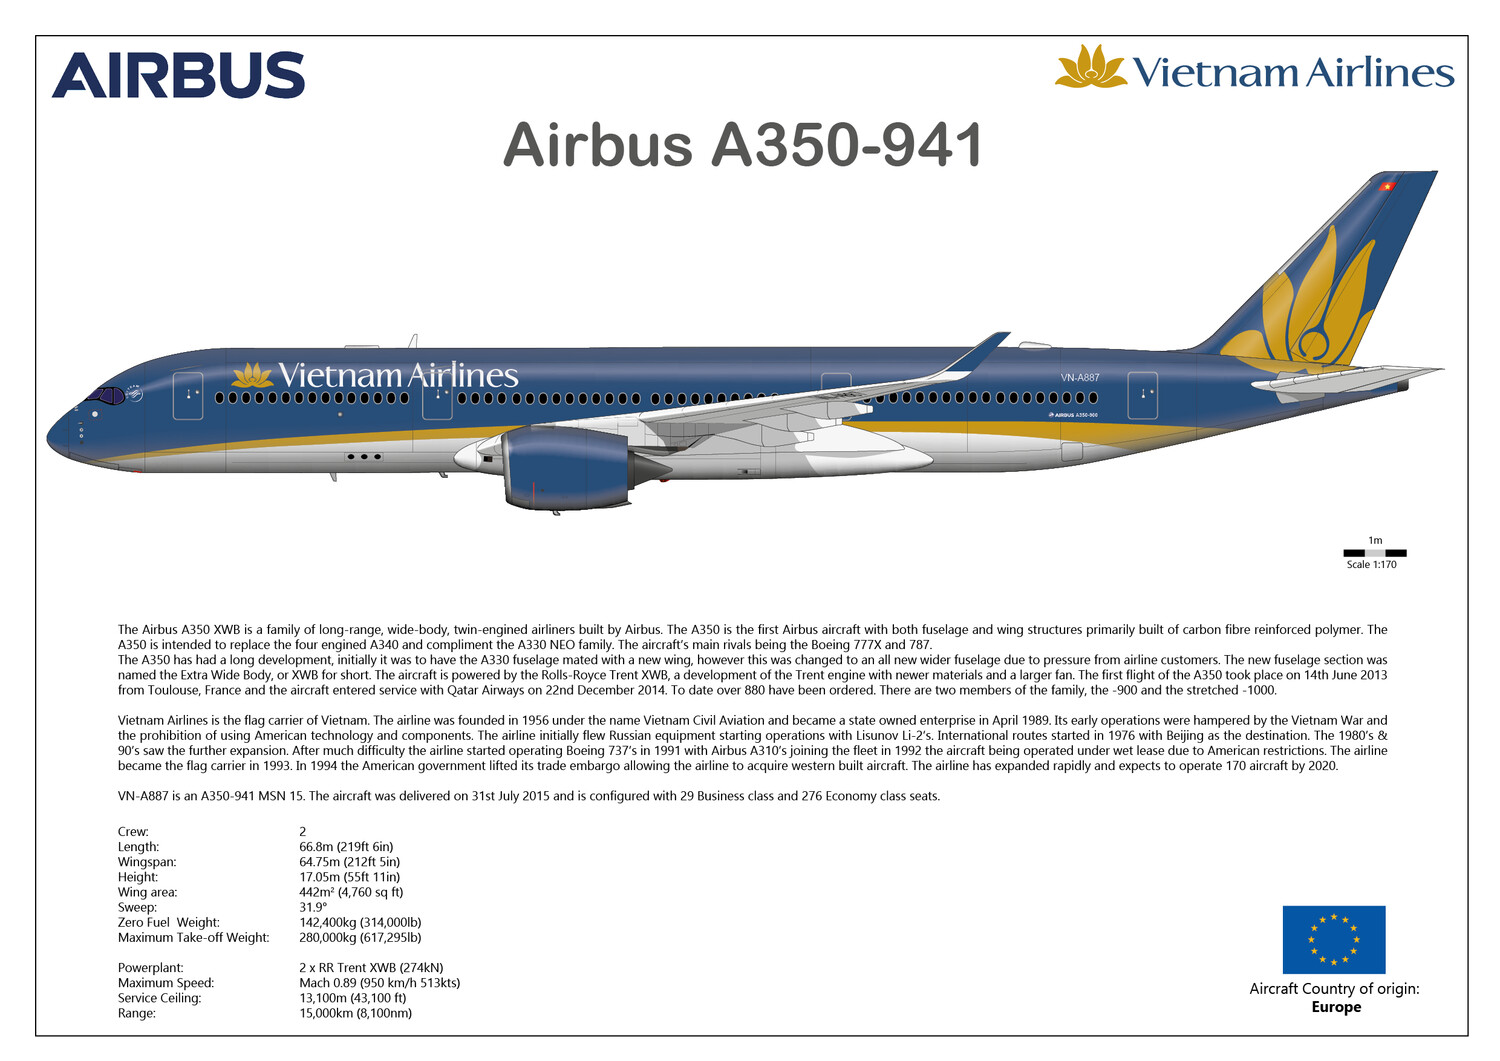 Airbus A350 VN-A887 in Vietnam Airlines livery